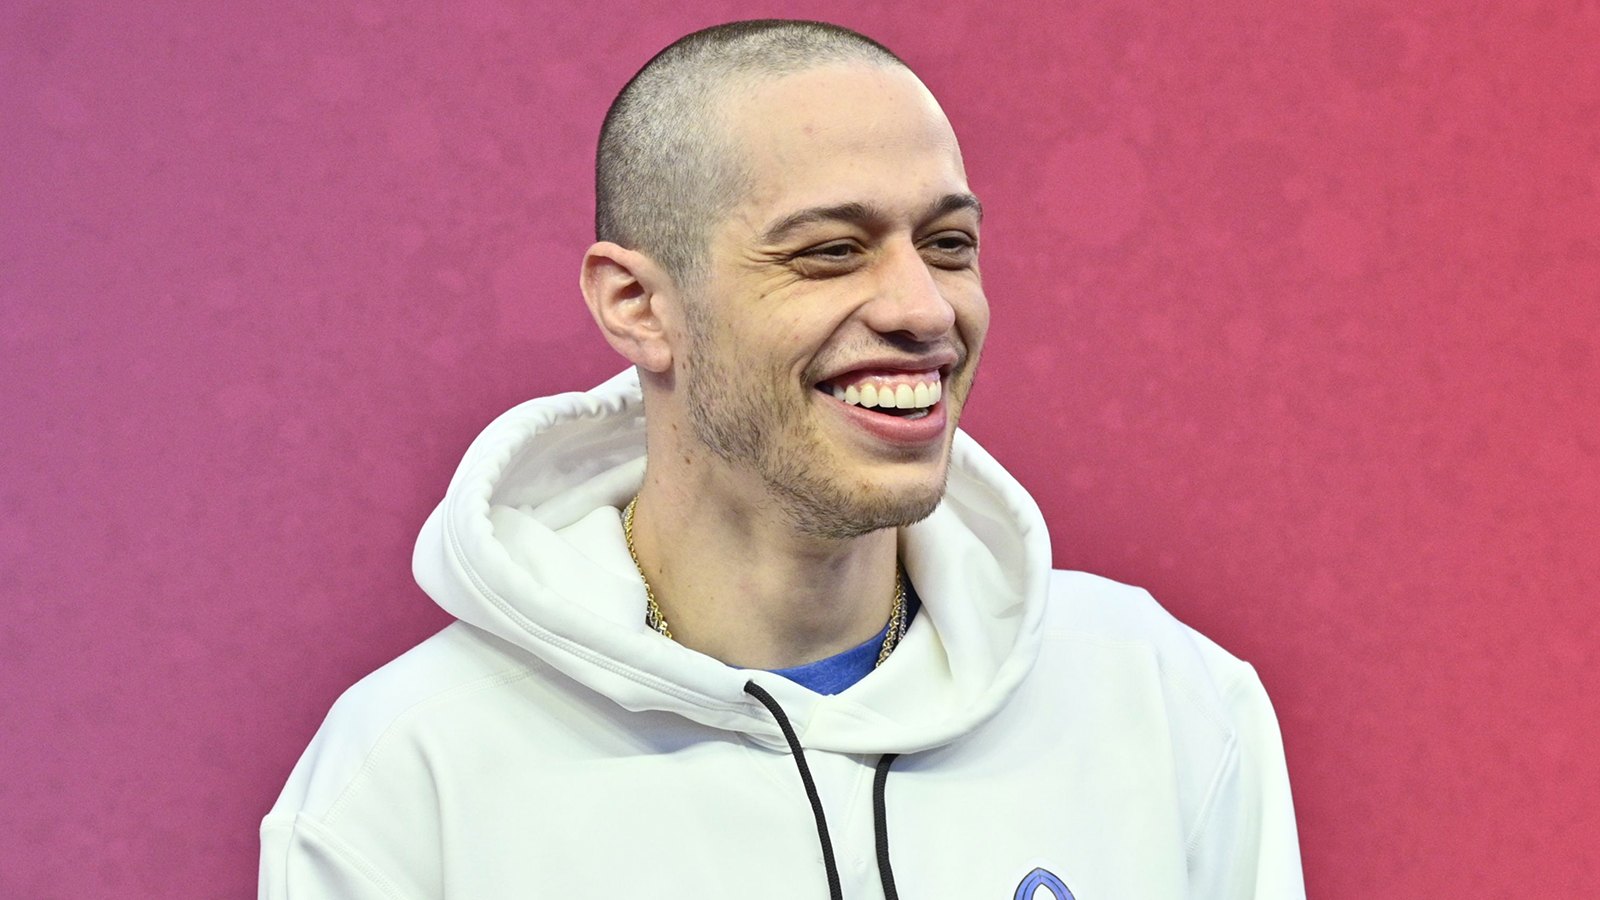 Pete Davidson Will Host ‘Saturday Night Live’ for 1st Time After Series Departure